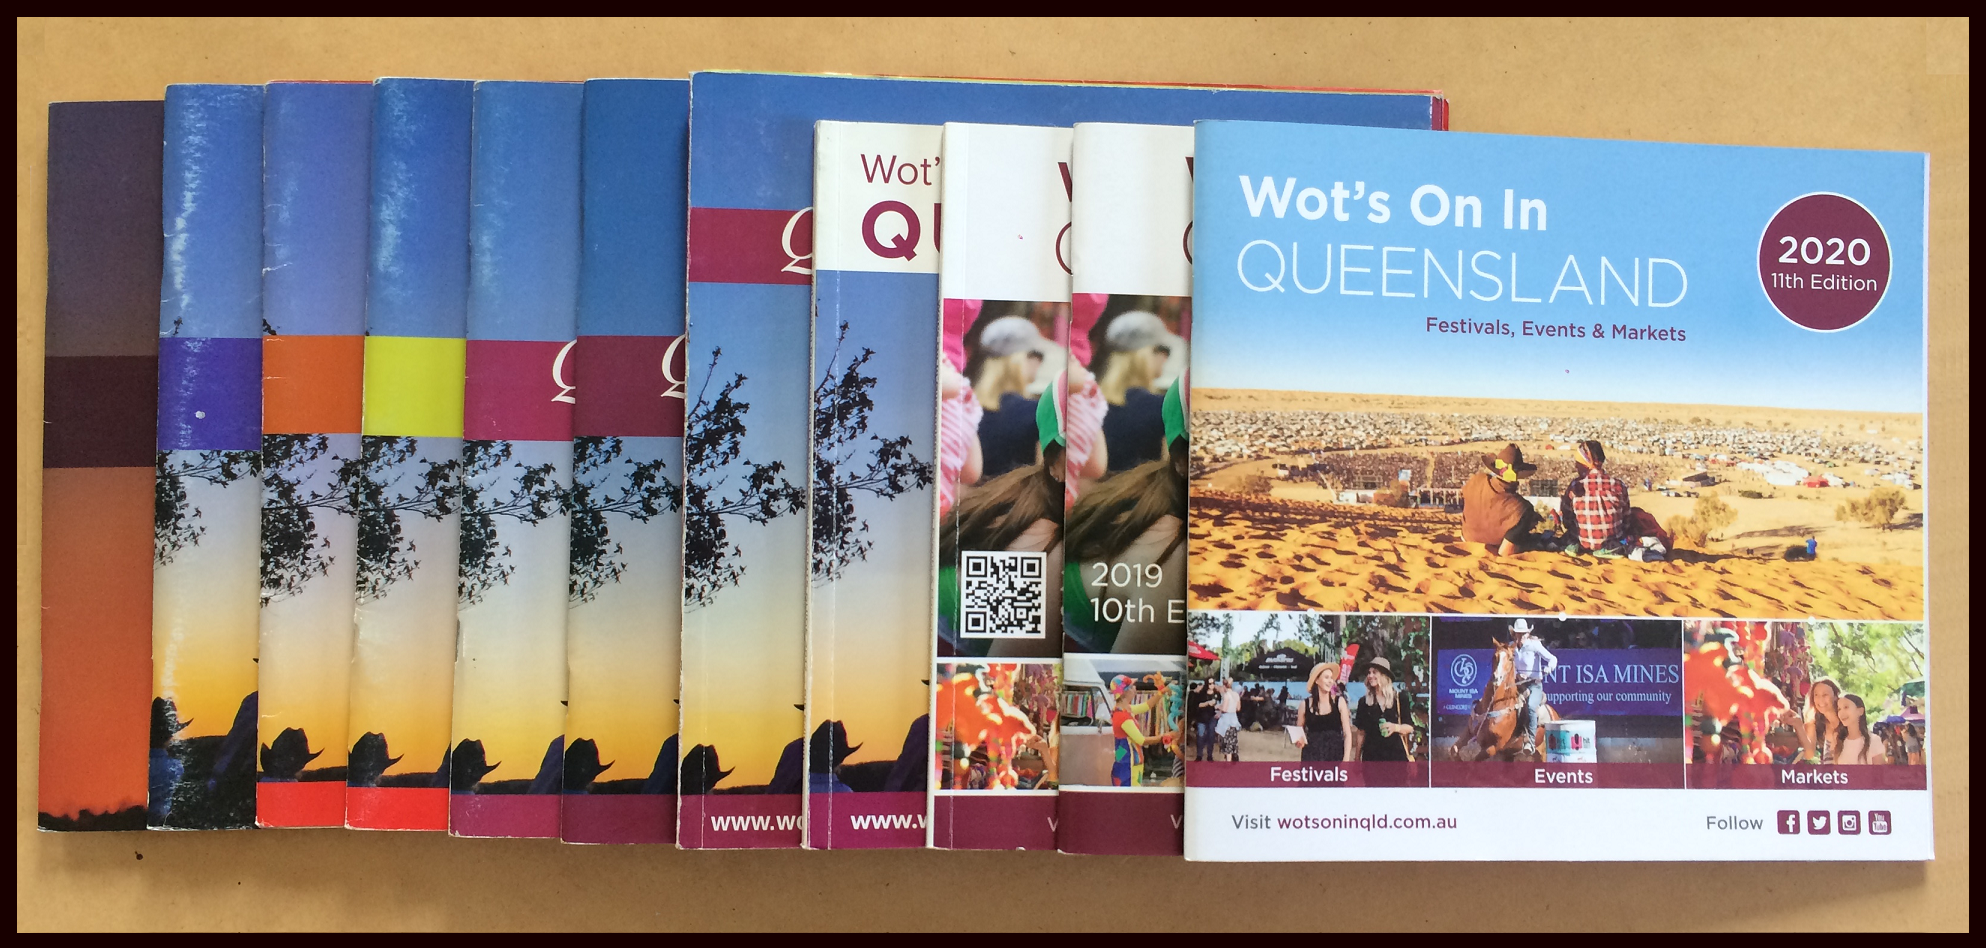 Wot's On In Queensland Festival and Events Guides books since 2009